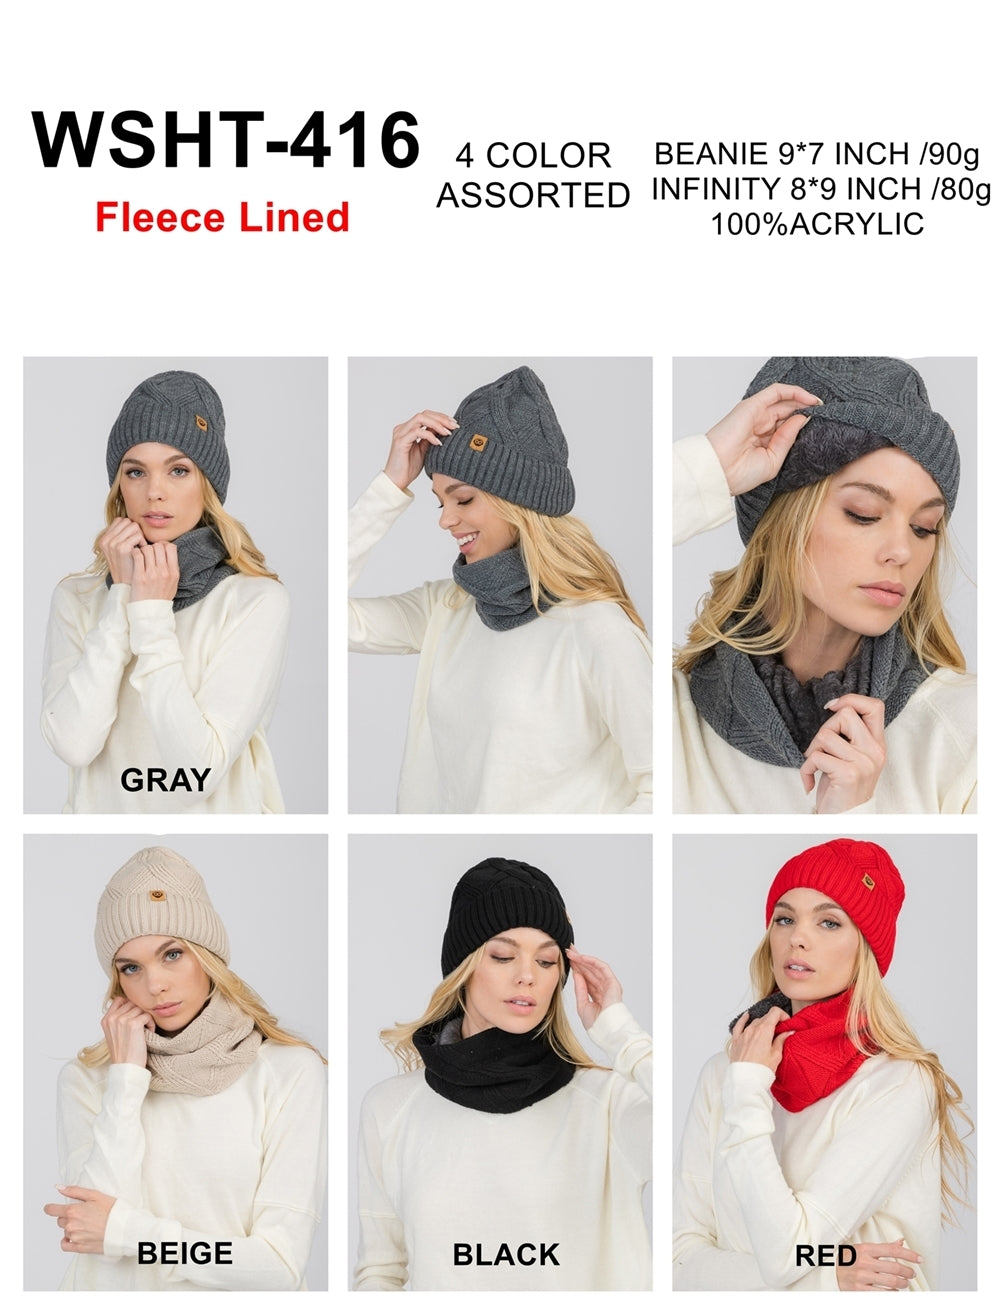 S29-1-1-WSHT-416-FLEECE LINED BEANIE  WITH INFINITY SCARF 4 ASSORTED COLORS/12PCS